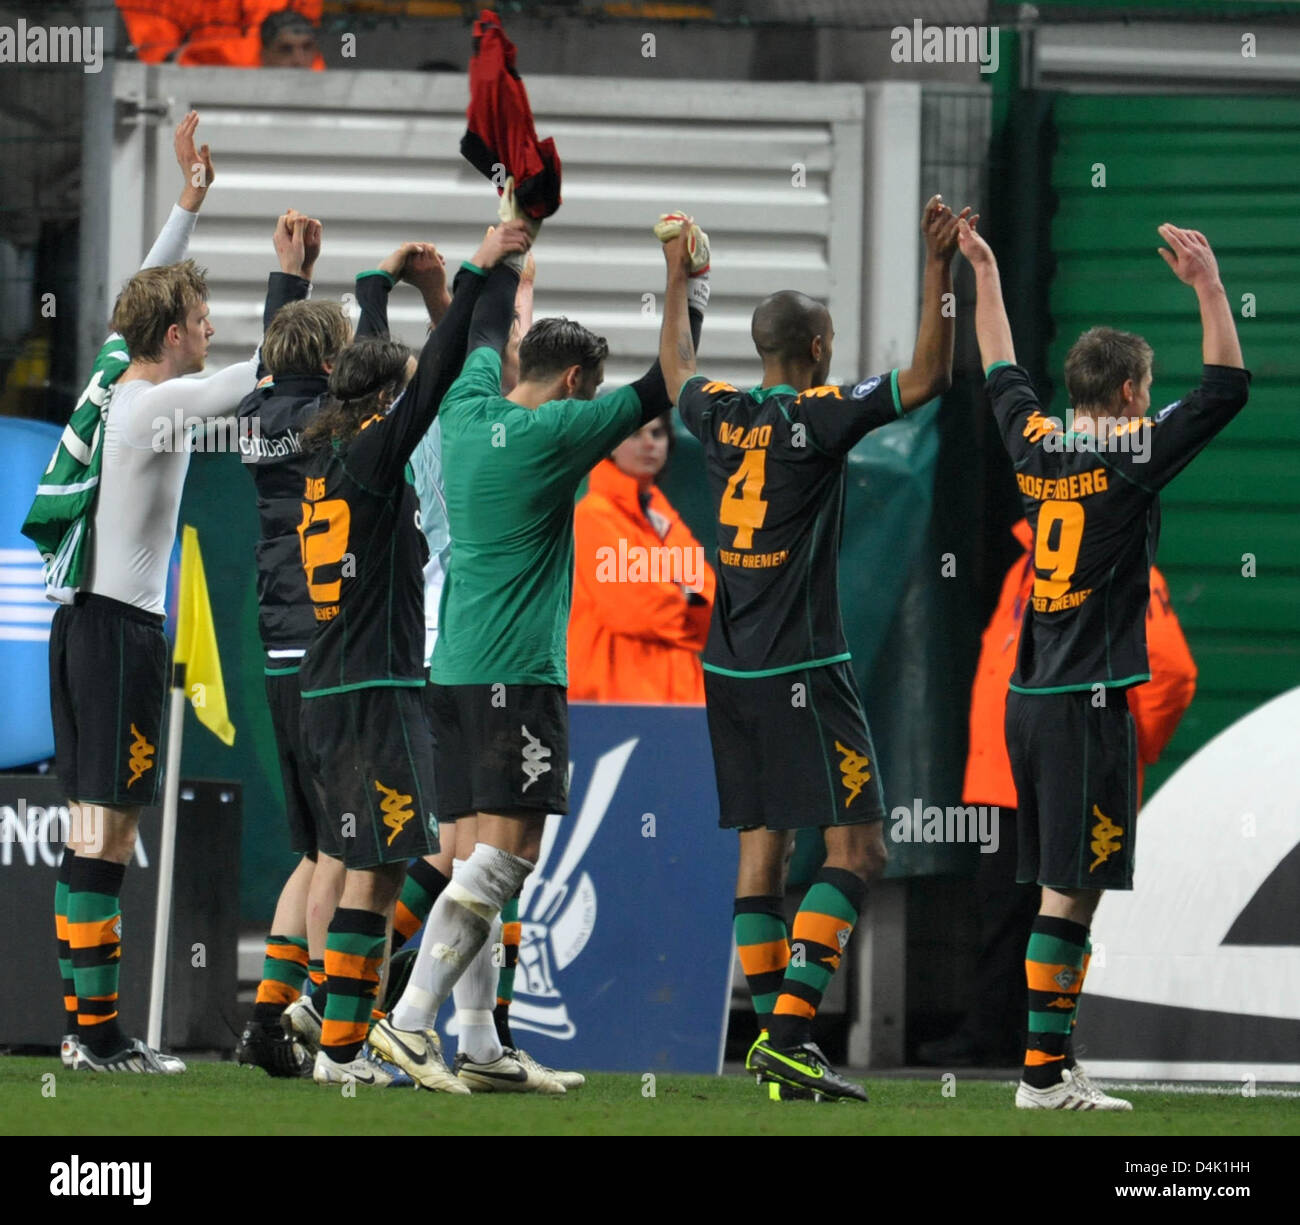 Werder Bremen players thank their fans who have traveled with them for the UEFA Cup last sixteen return match against AS Saint-Etienne at Stadium Geoffroy Guichard in Saint Etienne, France, 18 March 2009. The game ended in a 2-2 tie with Bremen qualifying for the quarter-finals. Photo: Carmen Jaspersen Stock Photo